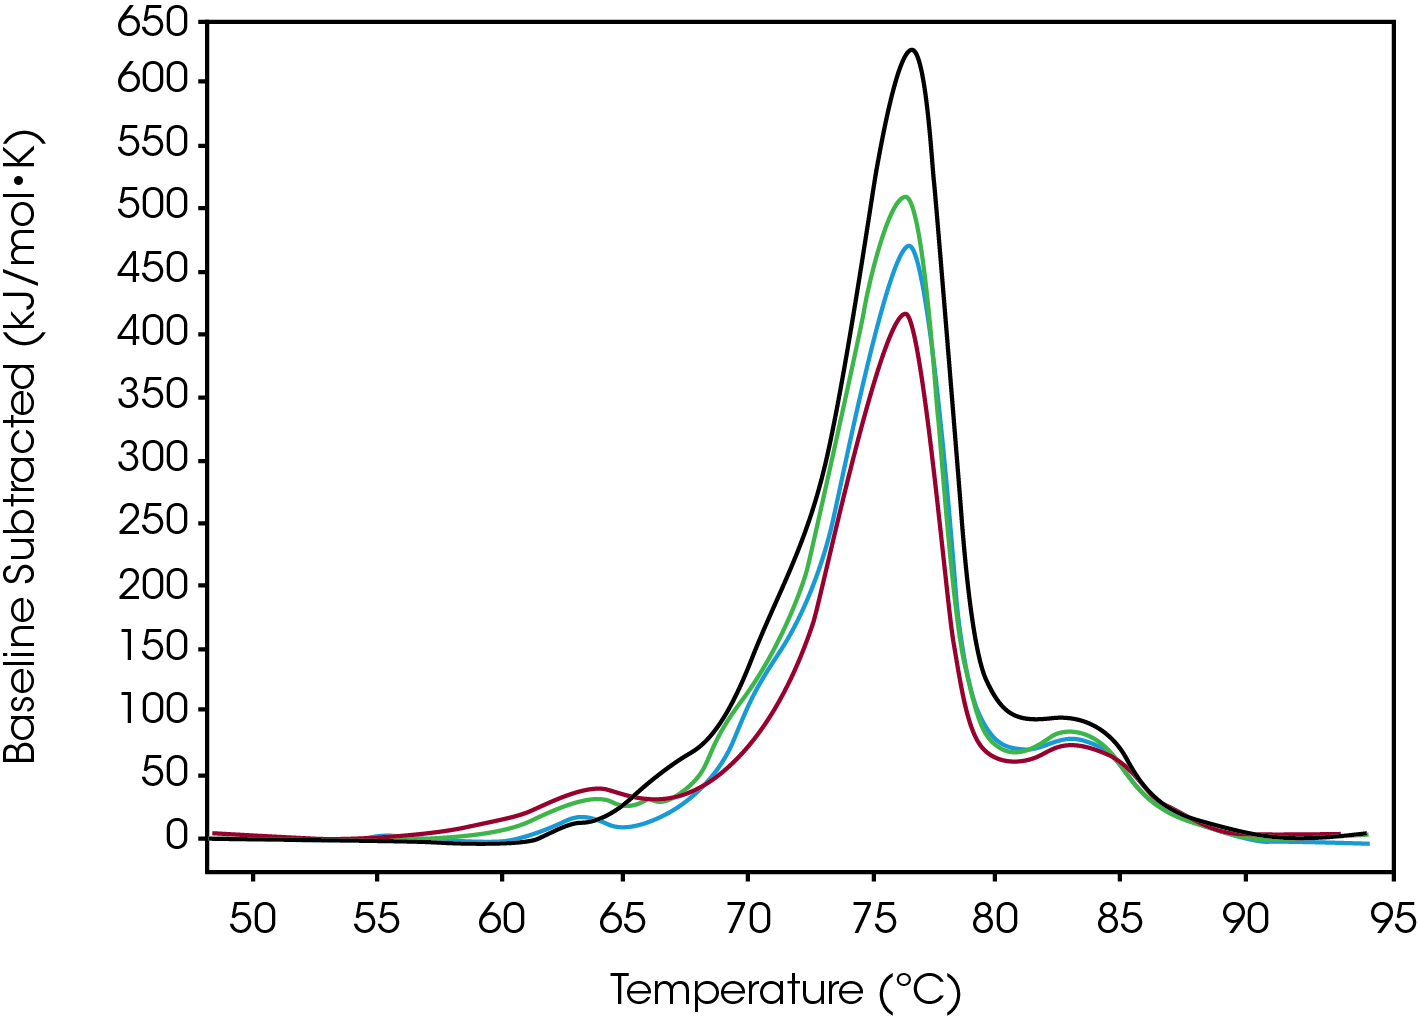 Figure 2. Conjugate Type I data: Native (black), Low (blue), Moderate (green) and High (red).